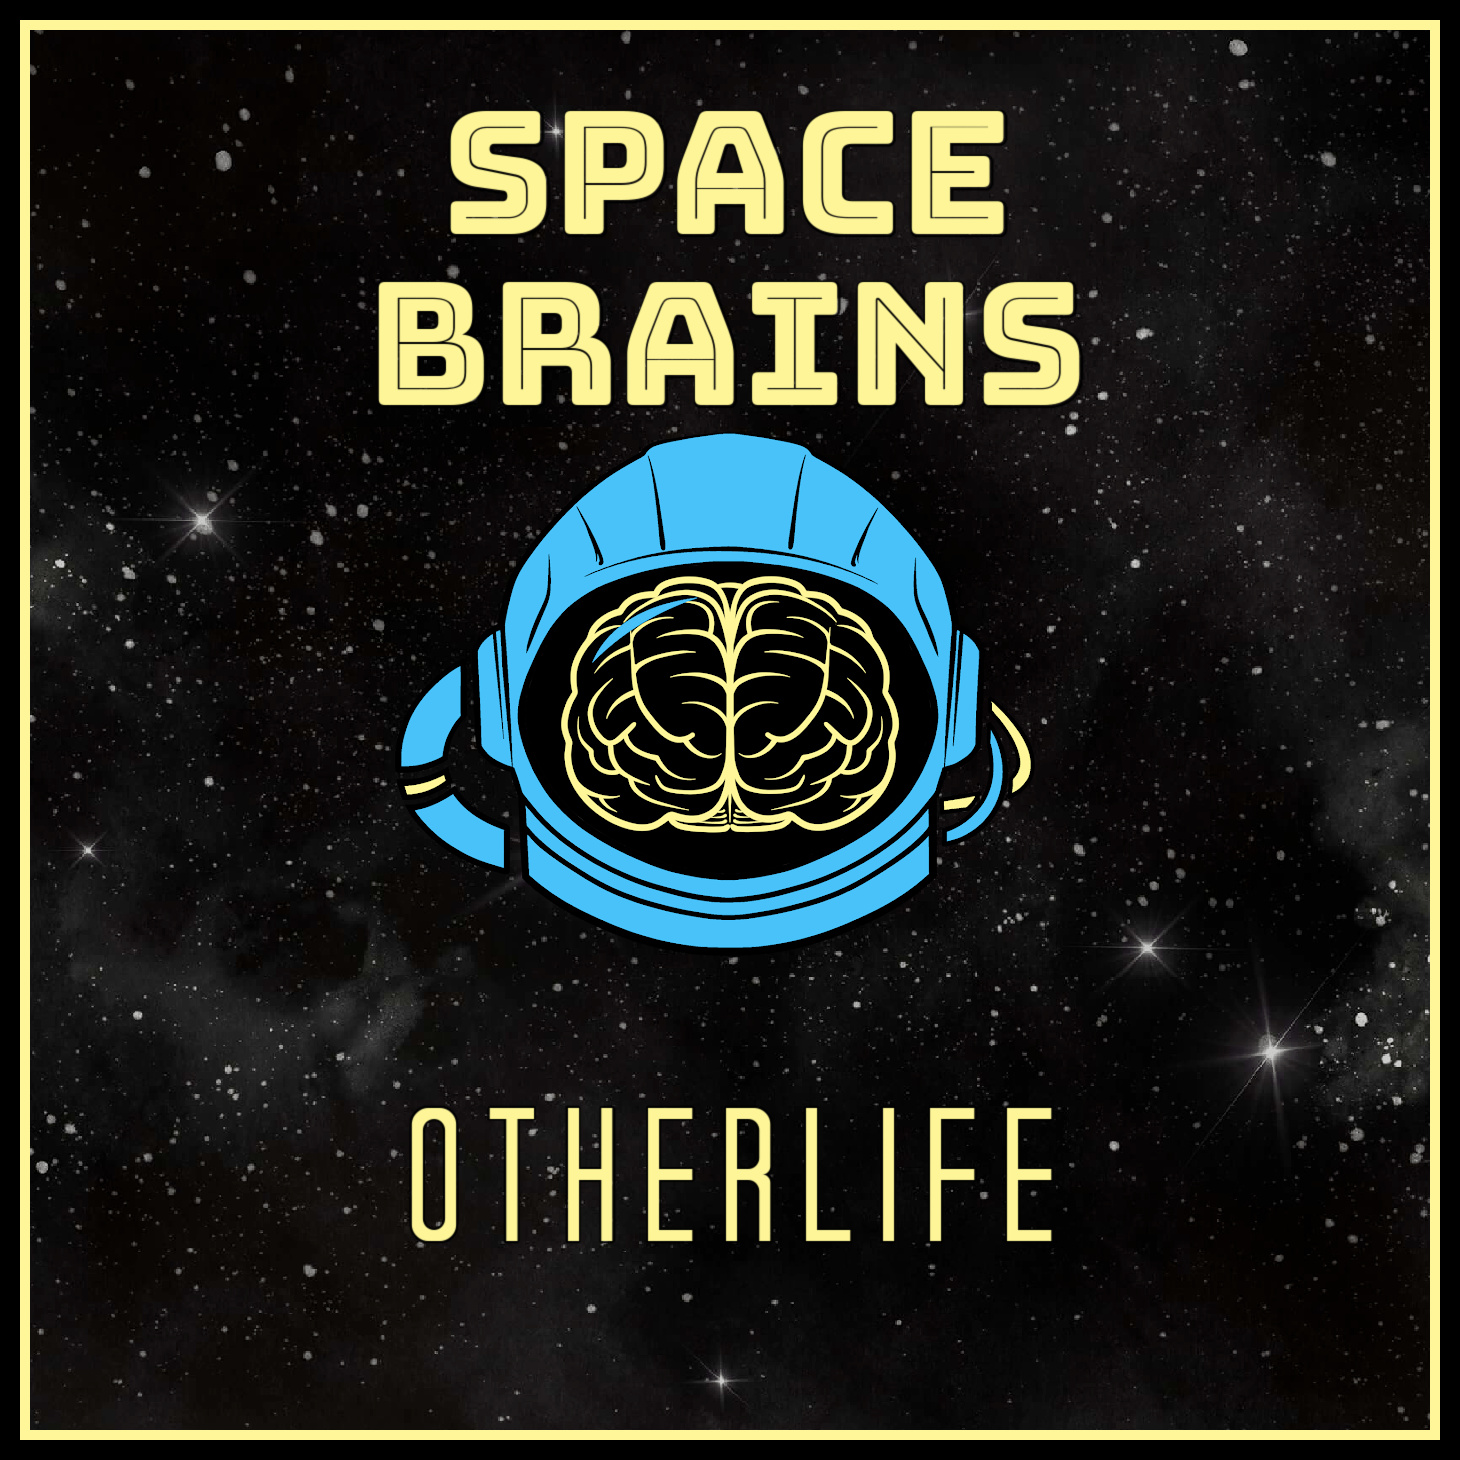 Space Brains - 6 - Otherlife